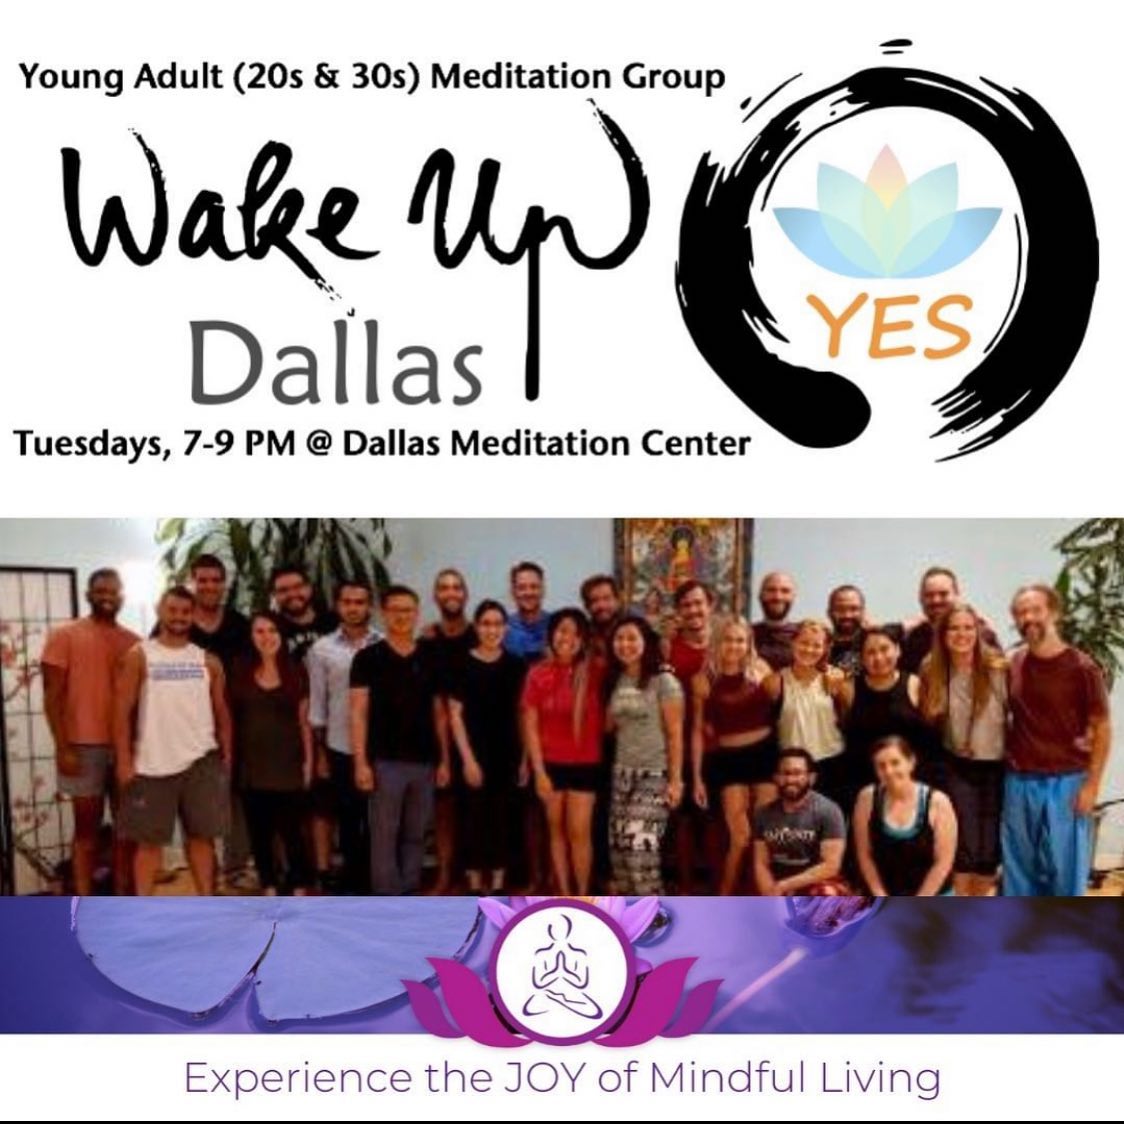 Alex and Nicole will be facilitating our evening and will be sharing excerpts and readings from Thich Nhat Hanh's writings, followed by time for discussion and sharing. 
 
Please note we've also returned back to our regular 7-9pm time for our Tuesday meetings and will continue meeting in a hybrid format. 
 
For those of us attending in-person, the Dallas Meditation Center is located at the following address: 
810 W. Arapaho Road, Suite 98
Richardson, Texas 75080. #dallasmindfulness #dallasmindfulnessteacher #wakeupdallasyes #meditationgroup  #thichnhathanh